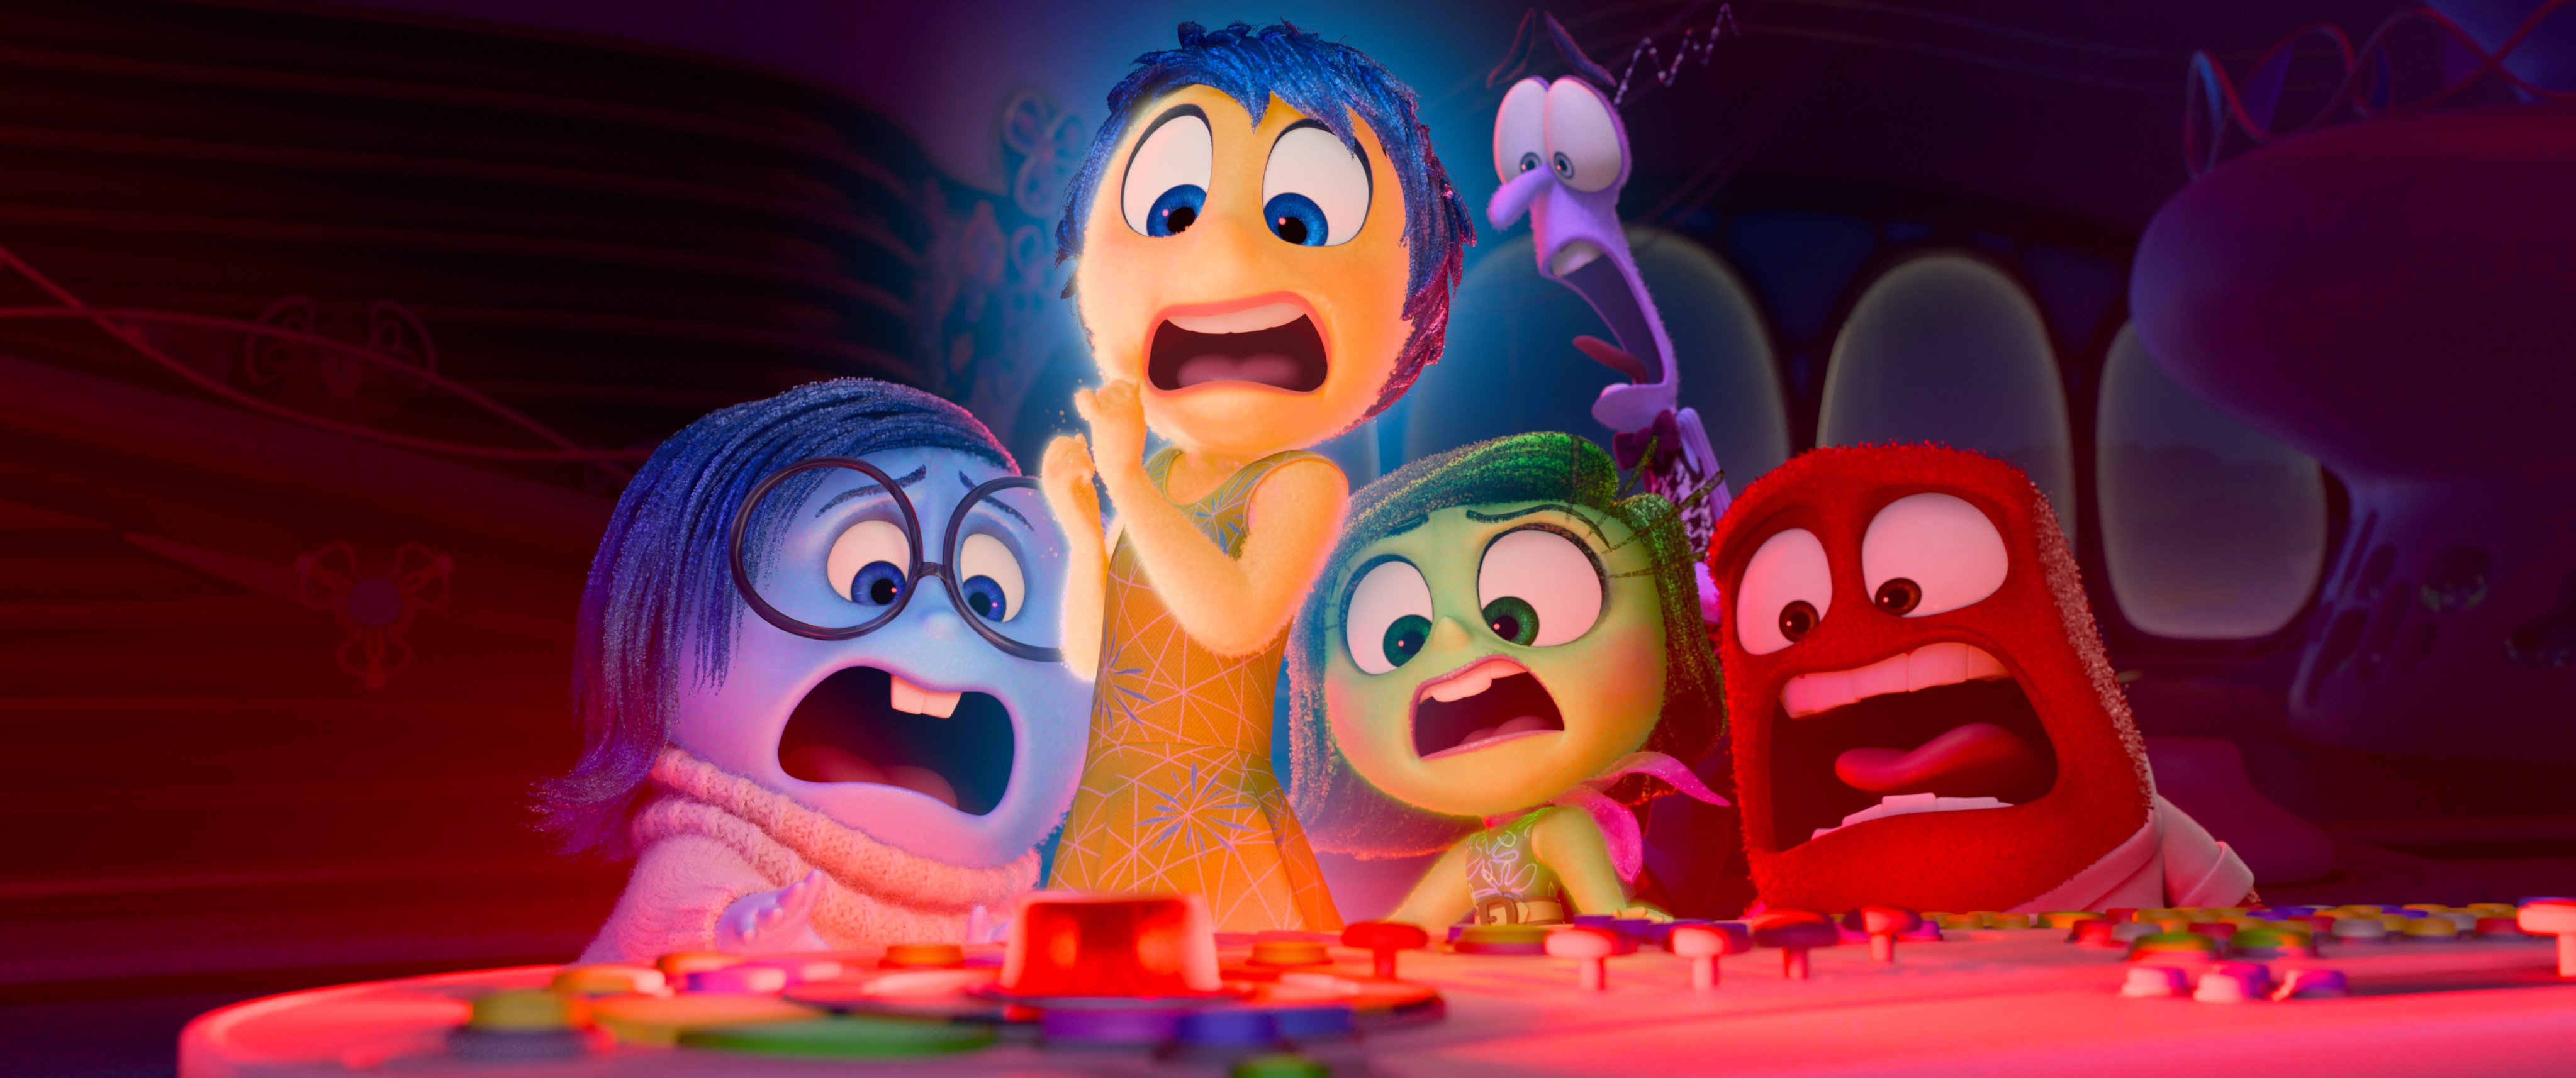 A still from Inside Out 2. Photo: Disney/Pixar